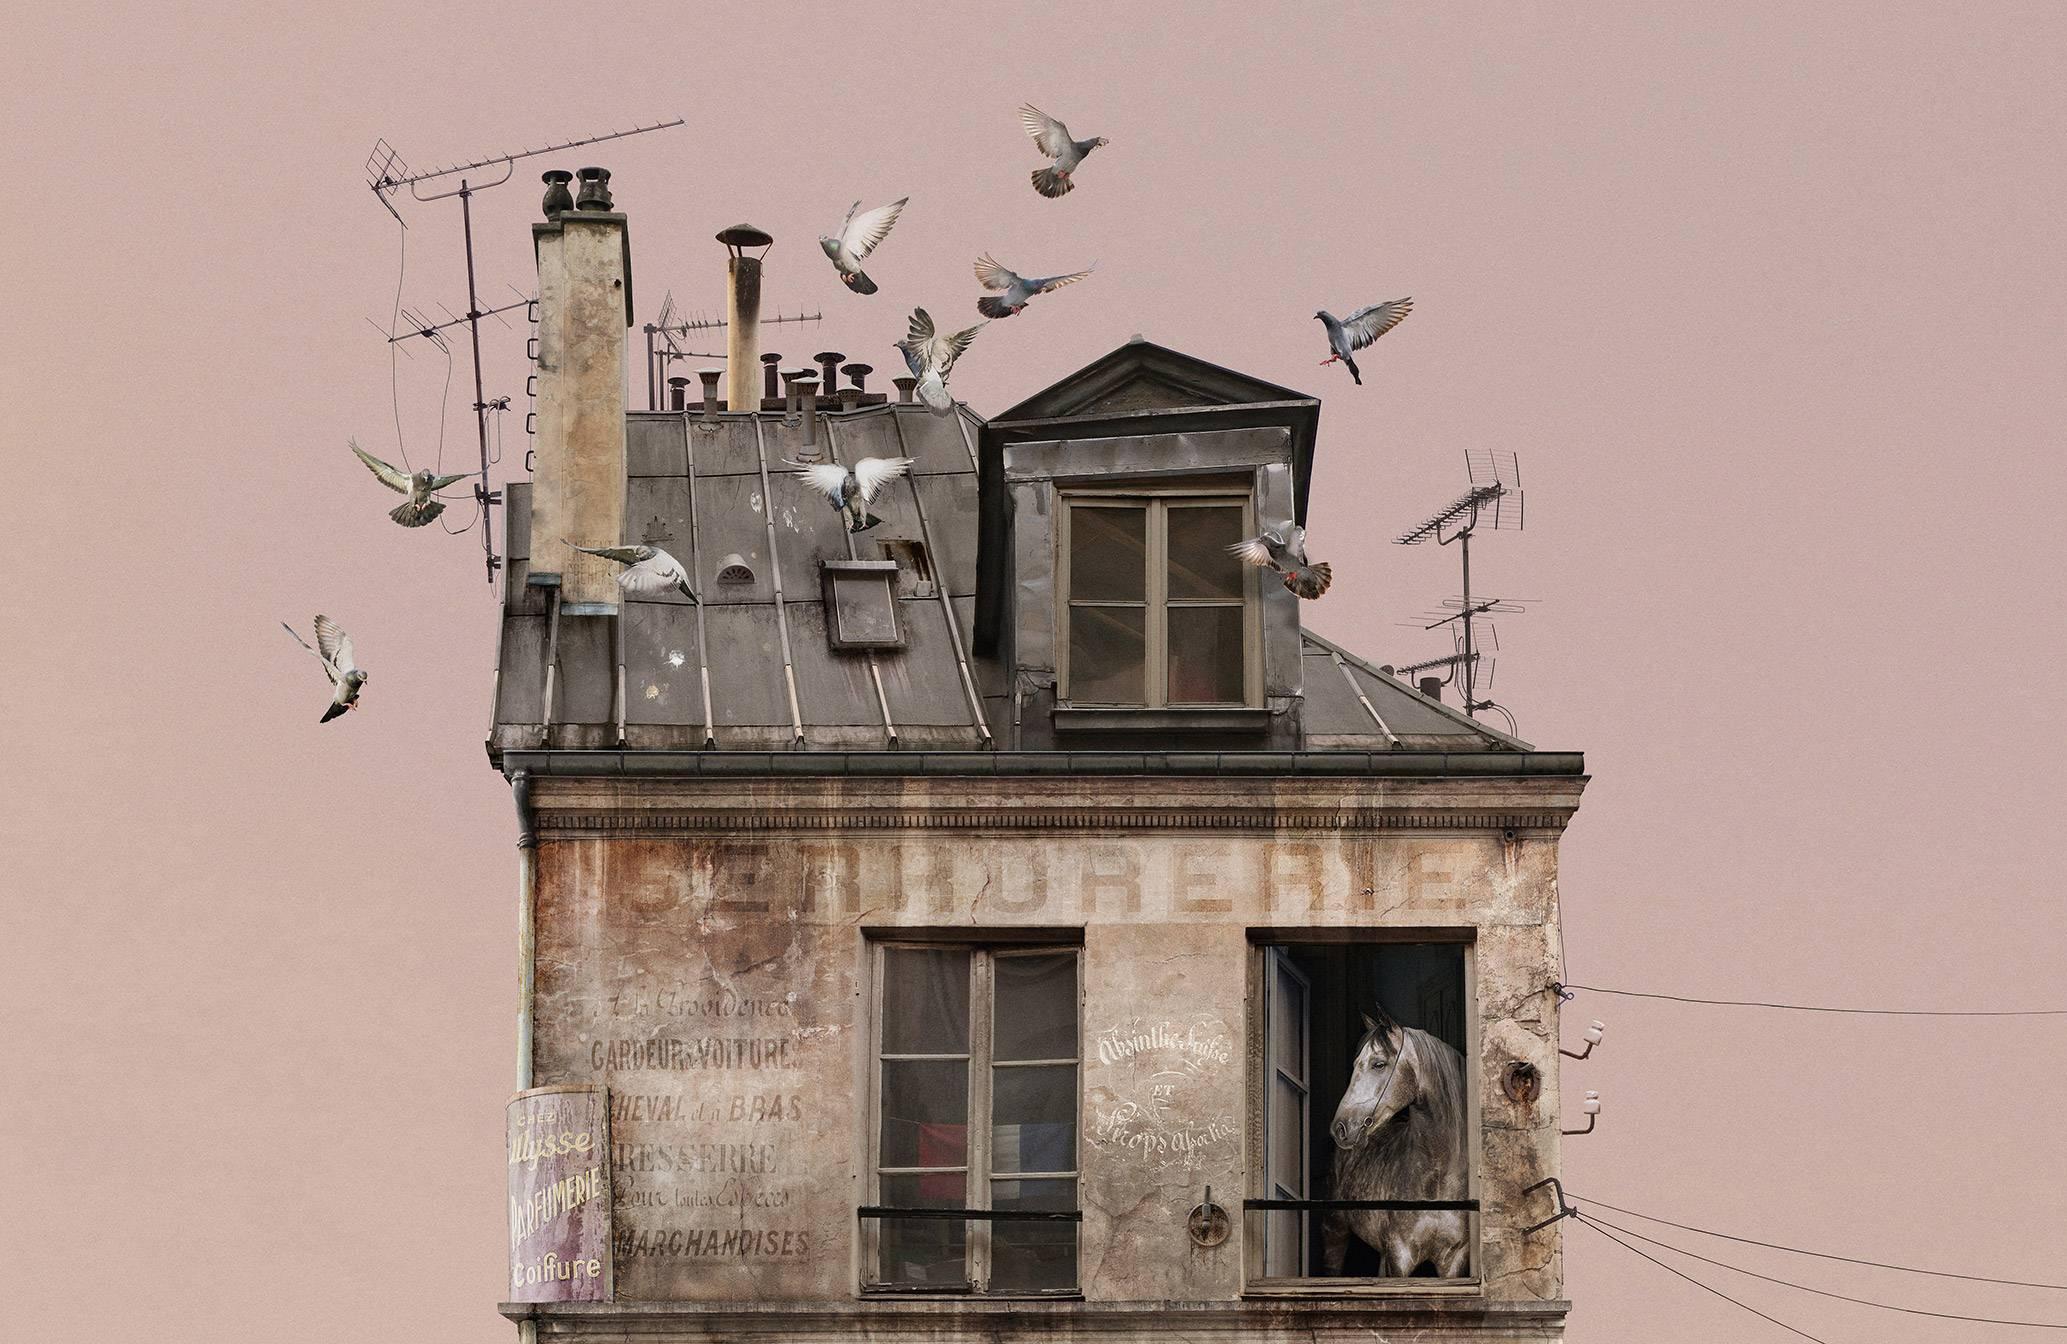 Big Day- Contemporary whimsical digital color photo of a Parisian flying house - Photograph by Laurent Chéhère